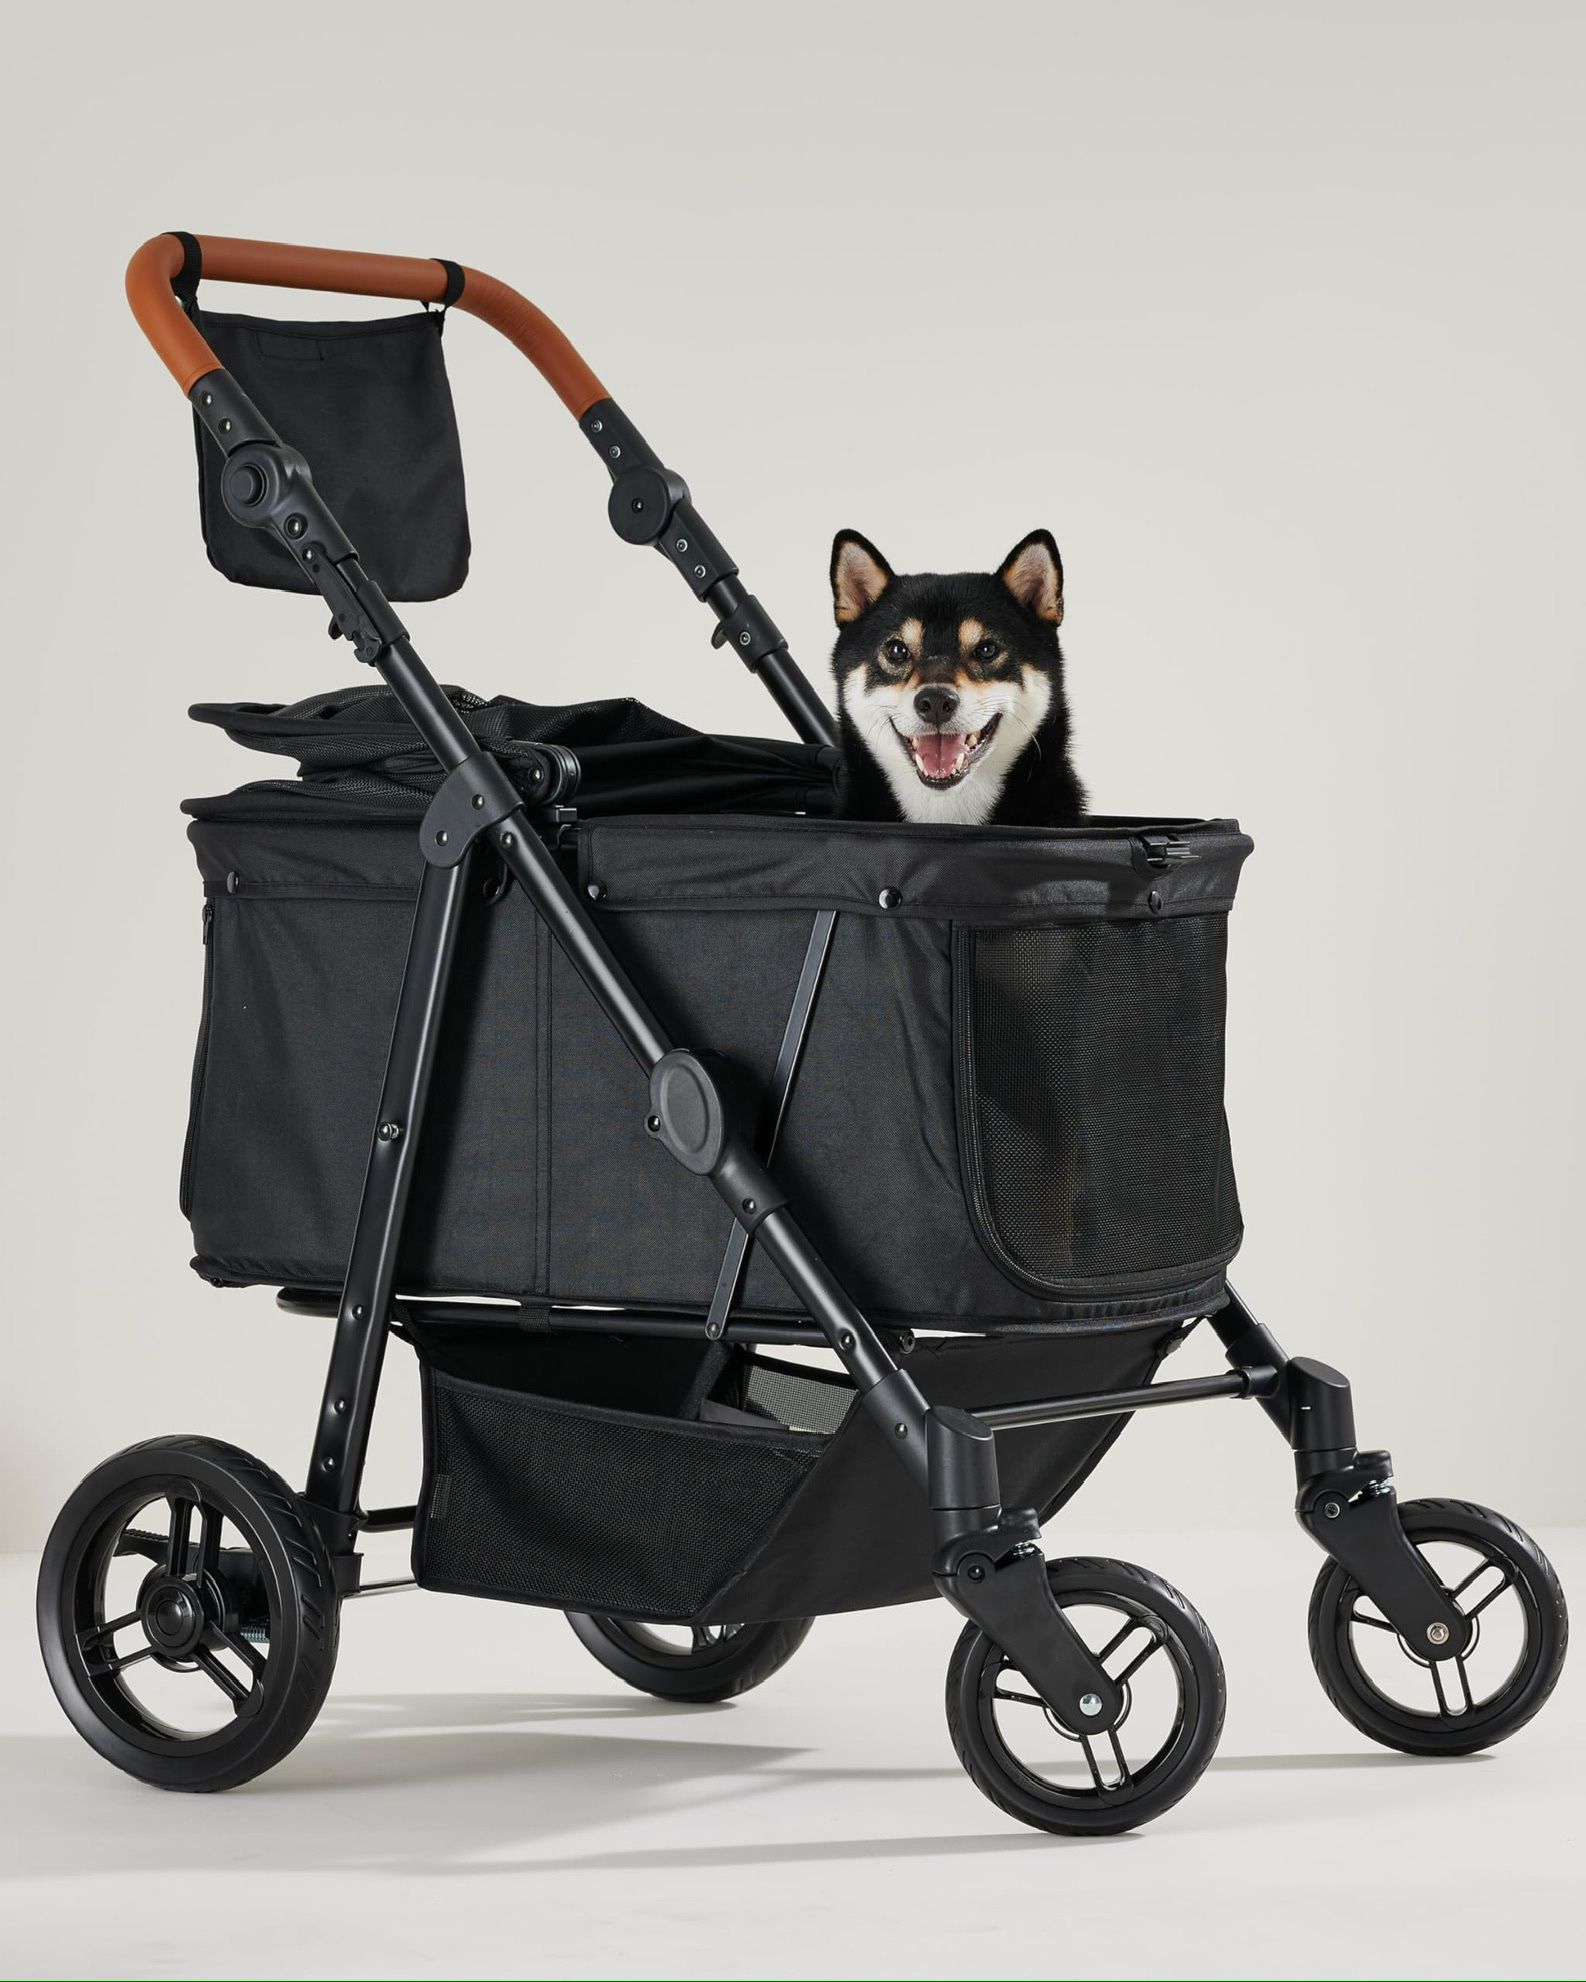 Zoosky Medium Folding Pet Stroller, Up To 66lbs Dog Folding Stroller, Adjustable Handle, 180? Convertible Canopy, 4 Wheels Dog/Cat Puppy Stroller For 